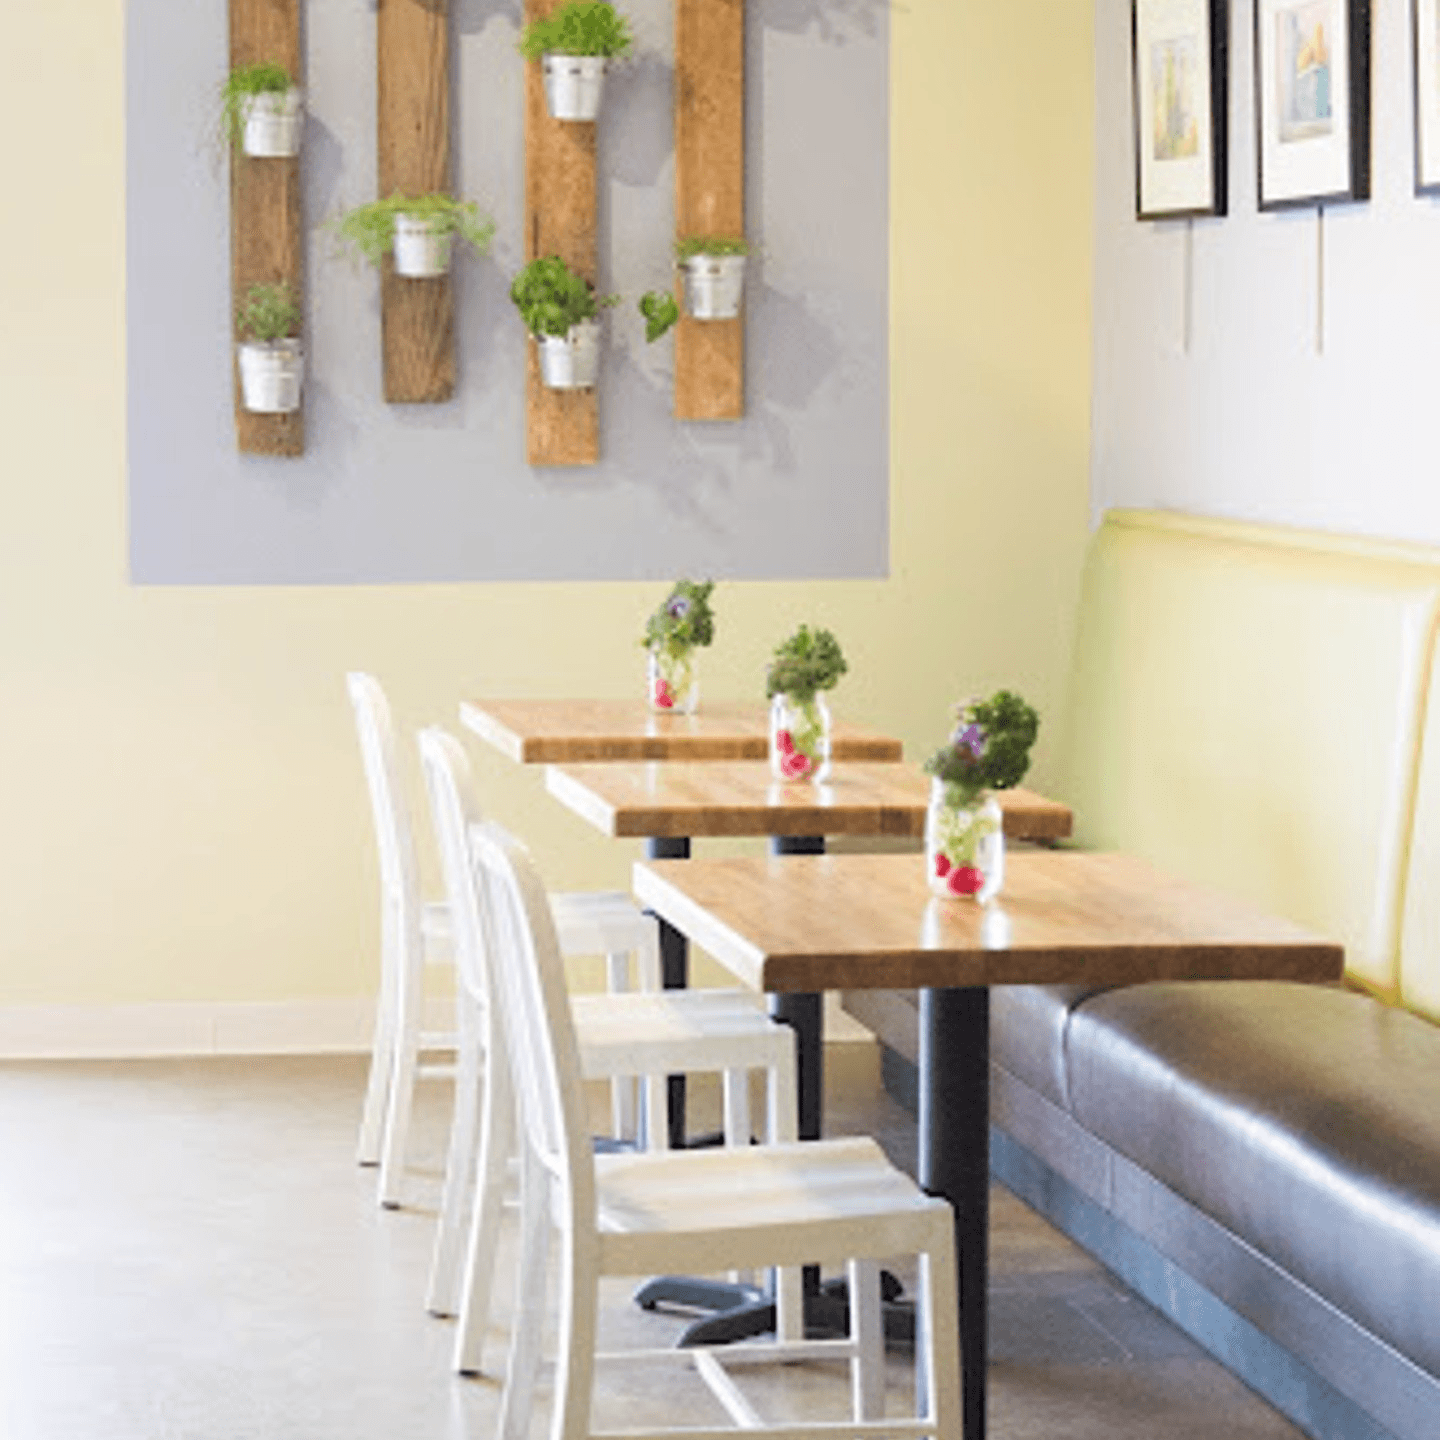 Healthy Dining Redefined at Bliss & Vinegar